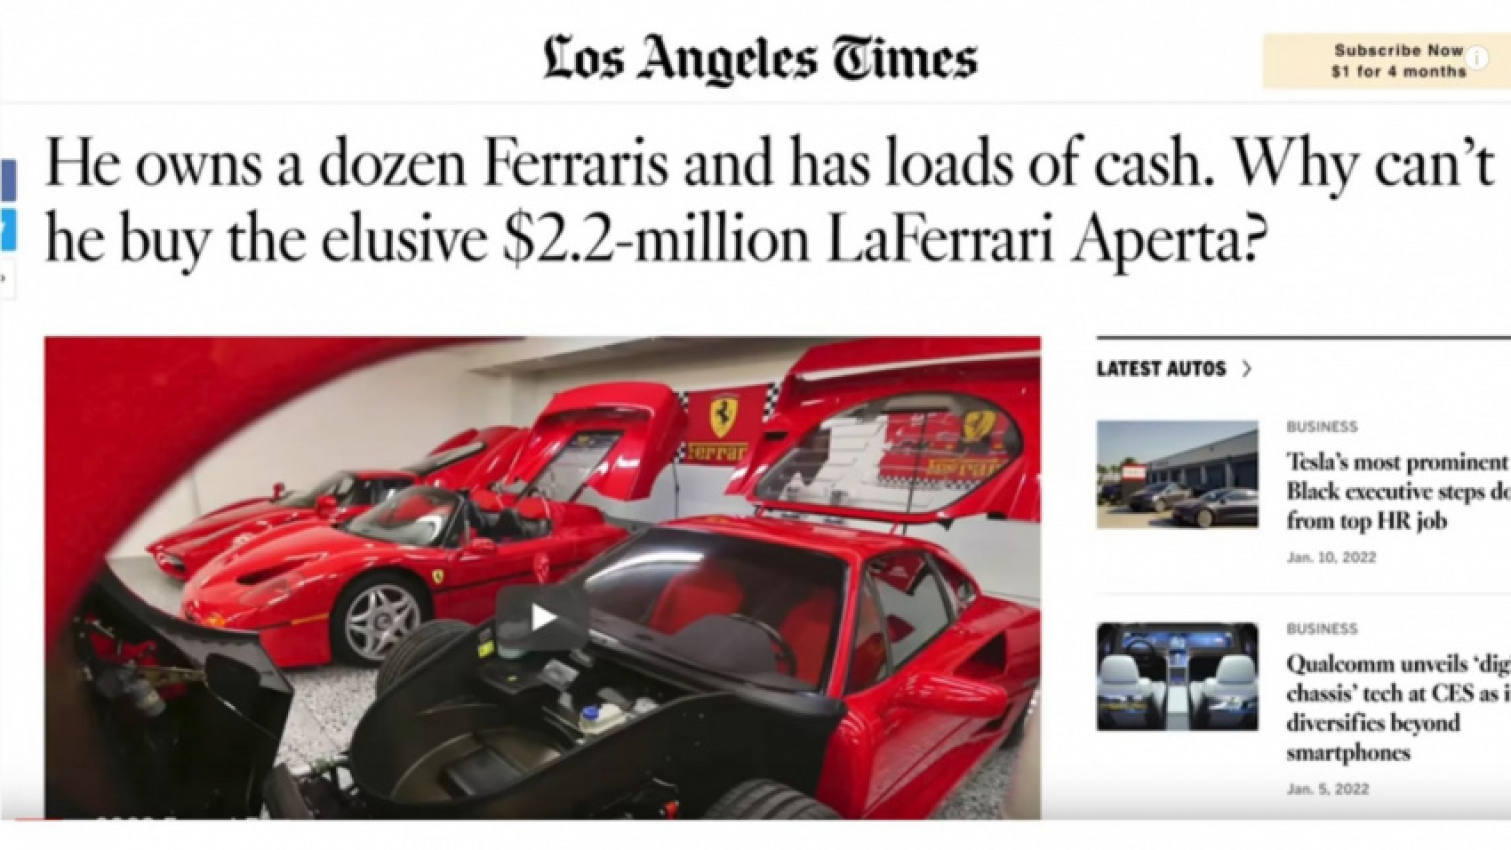 autos, cars, ferrari, american, asian, celebrity, classic, client, europe, exotic, features, handpicked, luxury, modern classic, muscle, news, newsletter, off-road, sports, supercar, trucks, ferrari collector finally gets his laferrari aperta